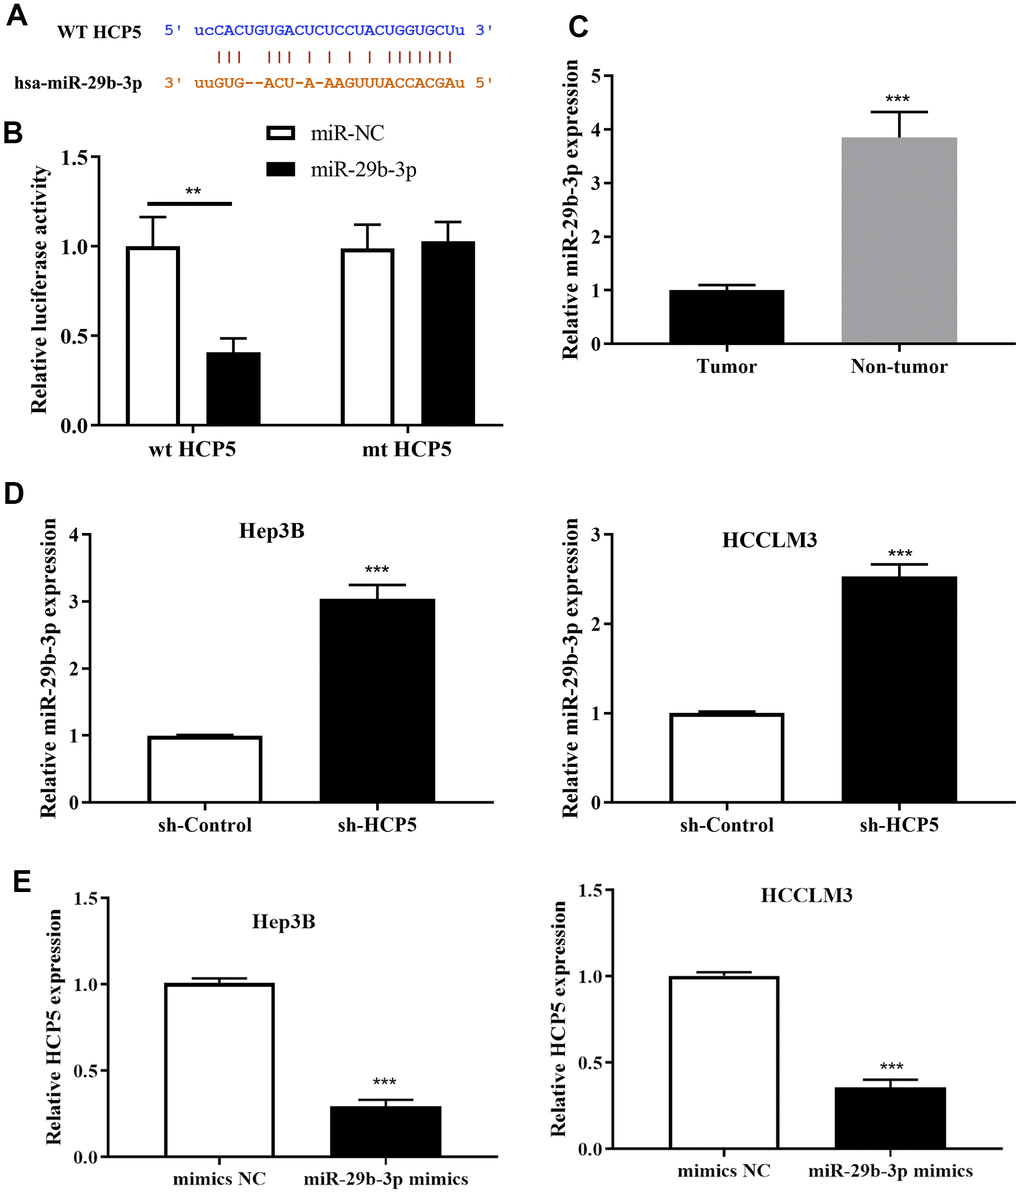 MicroRNA miR-29b-3p is a negatively regulatory target gene of lncRNA HCP5. (A) Bioinformatics predictions demonstrated that a direct HCP5 binding site existed in miR-29b-3p. (B) Dual luciferase assay demonstrating that miR-29b-3p and HCP5 directly interacted (**pC) MiR-29b-3p is expressed in lower-than-usual quantities in hepatocellular carcinoma (HCC) tumor tissues when compared to non-tumor tissues (***pD) Results of qRT-PCR showing that the knockdown of HCP5 increases the expression of miR-29b-3p both in HCCLM3 and Hep3B cell lines (***pE) Results of qRT-PCR showing that up-regulation of miR-29b-3p prohibits the expression of HCP5 (***p